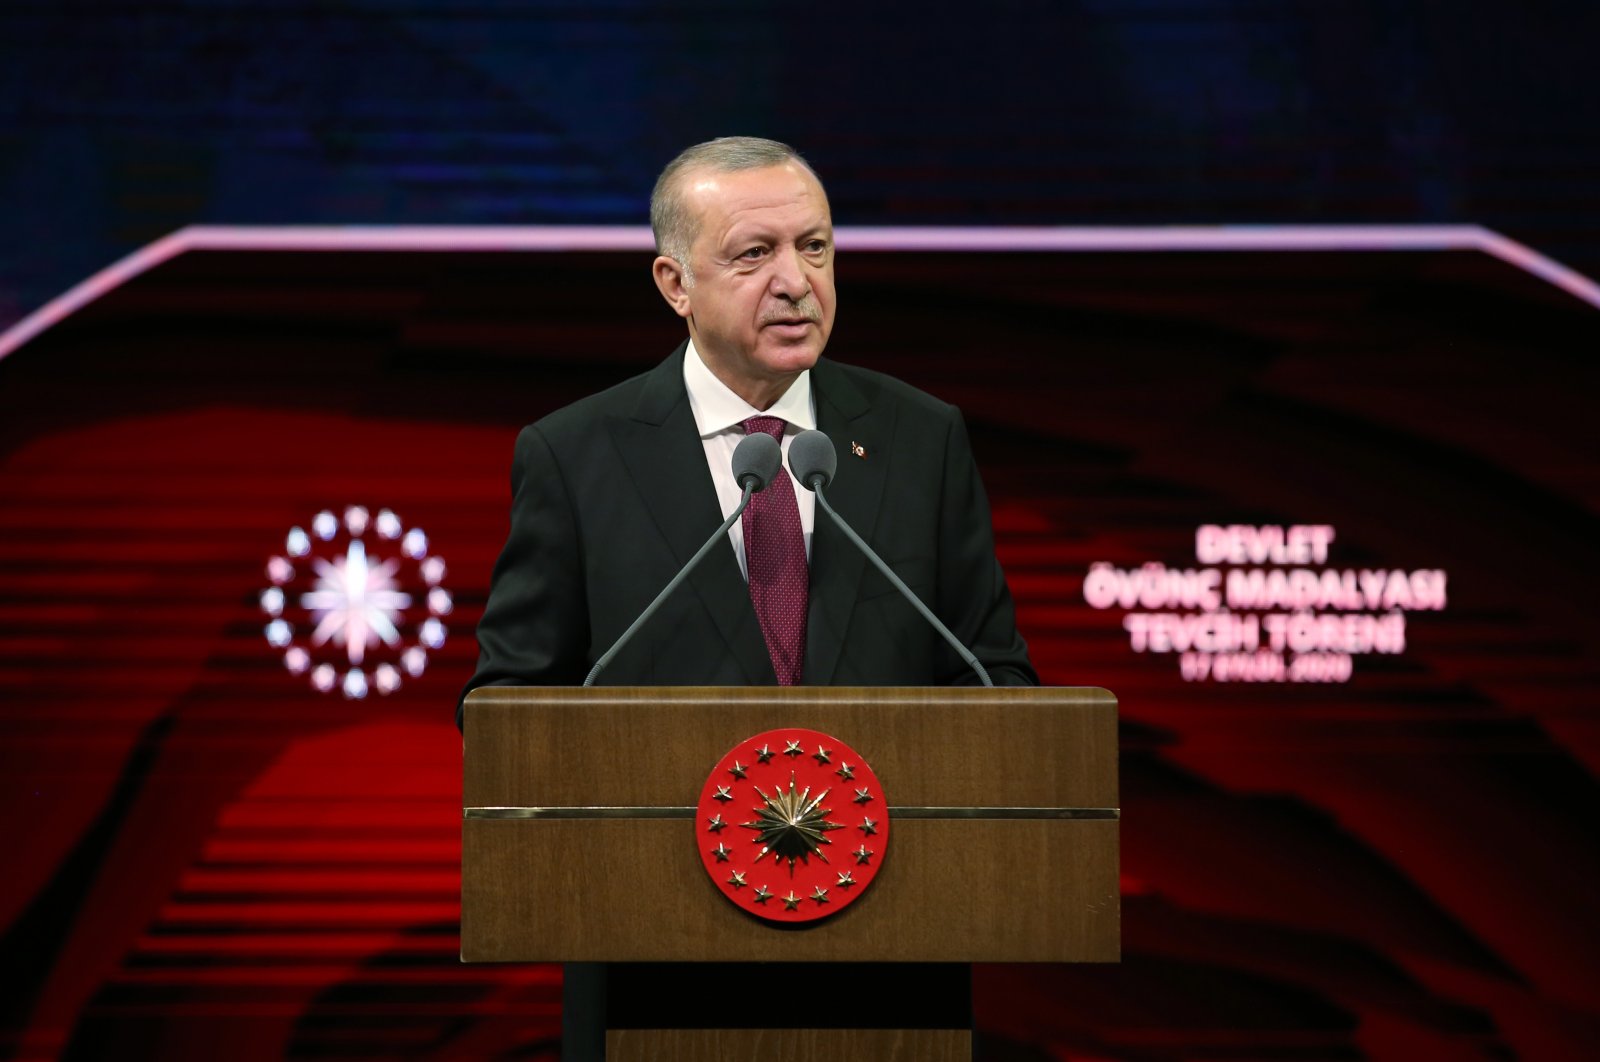 President Recep Tayyip Erdoğan speaks at the State Medal of Commendation Ceremony at Beştepe National Congress and Culture Center in the capital Ankara on Sept. 17, 2020. (AA Photo)